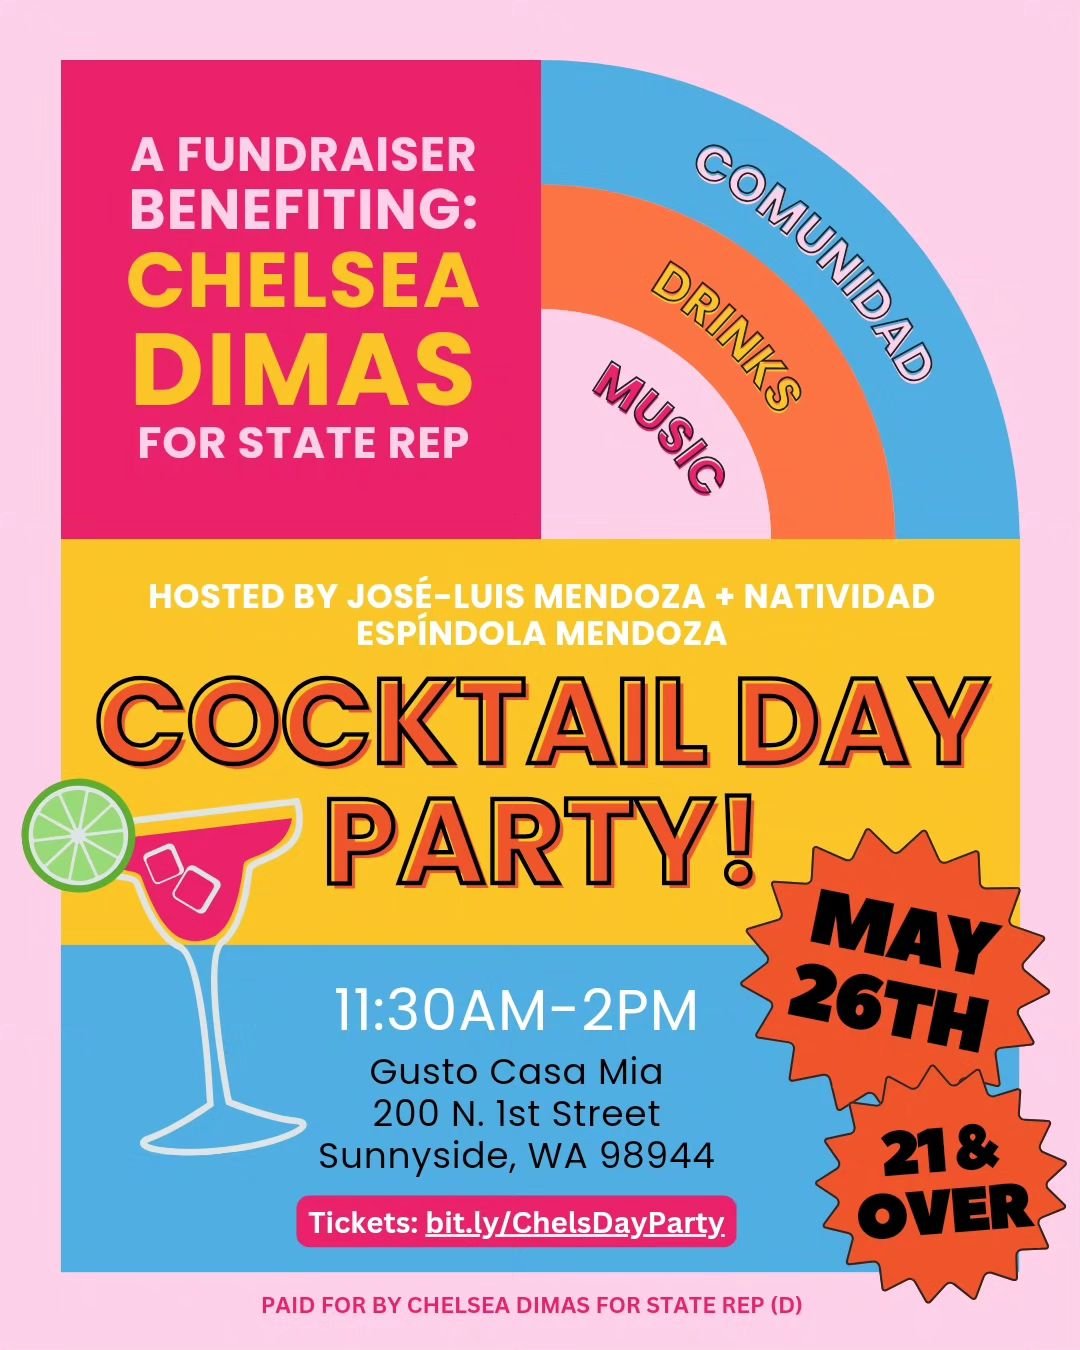 Okayyyy mi gente..estan listos for some sun, music, drinks, y comunidad?! 🍹😎☀️ welll say less and join us at our Cocktail Day Party in support of Chelsea Dimas for State Rep!

This event is being hosted by Sunnyside residents and family friends, Jo